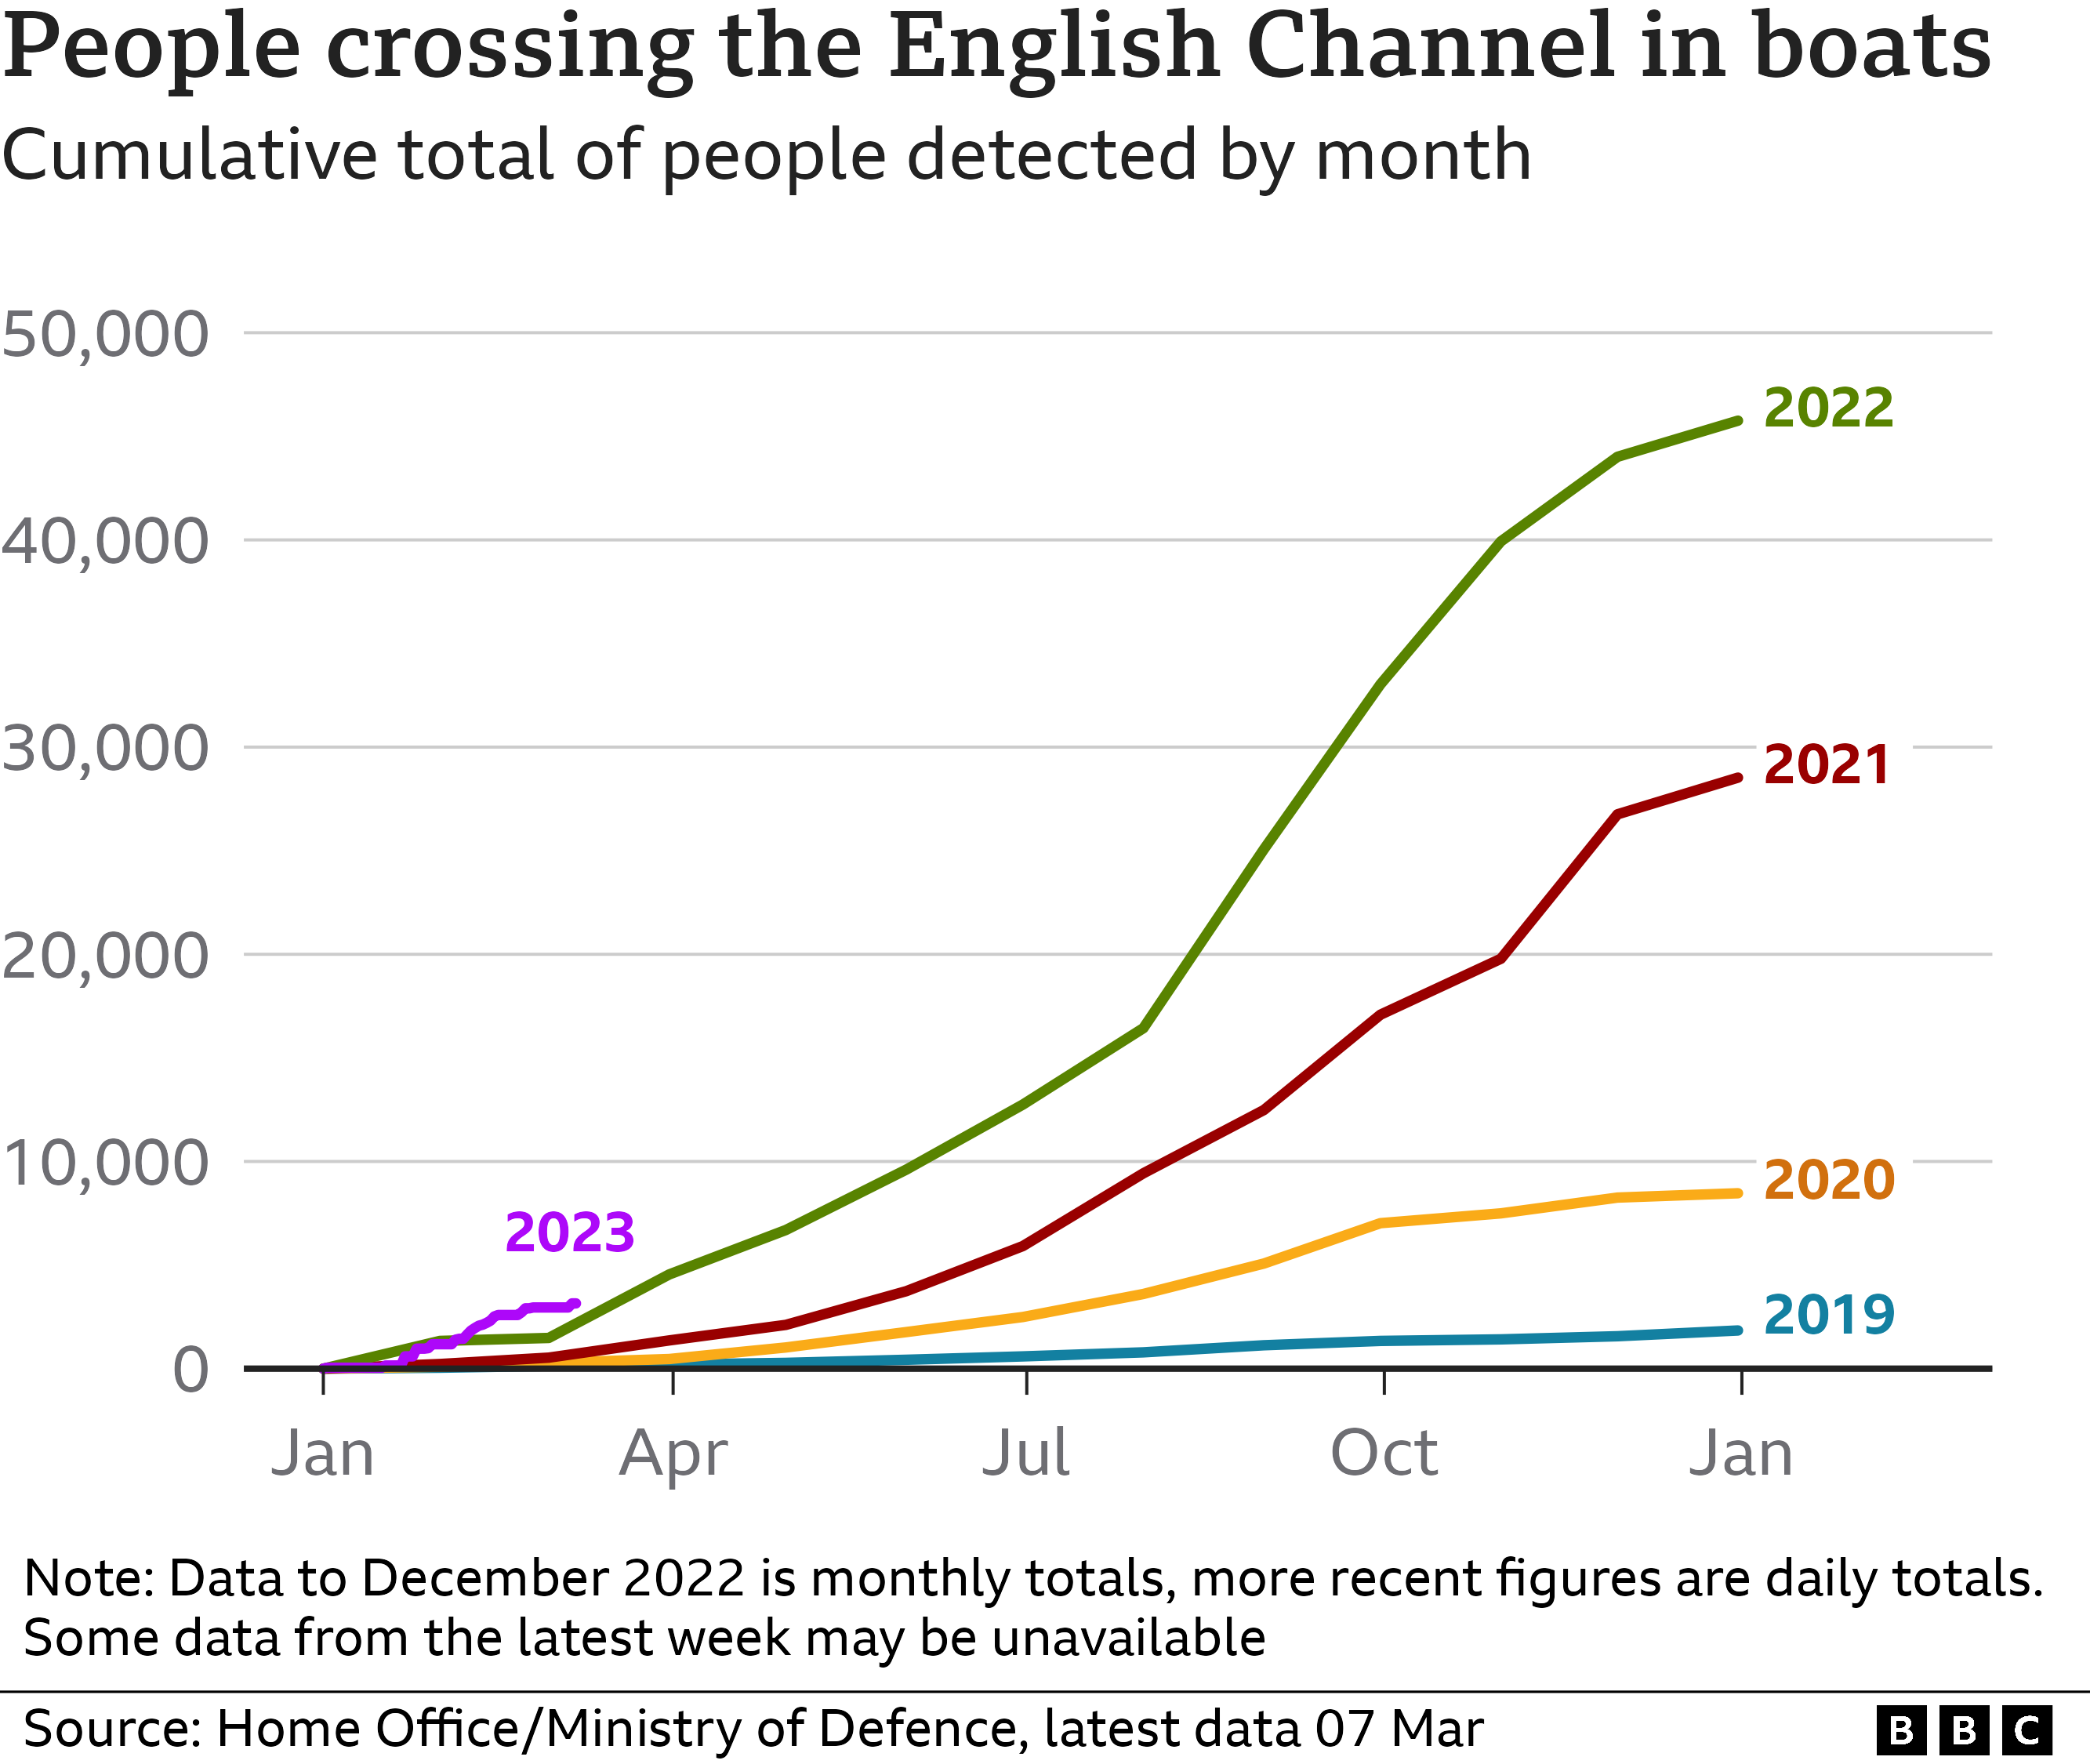 Chart showing the number of people crossing the English Channel (9 March 2023)